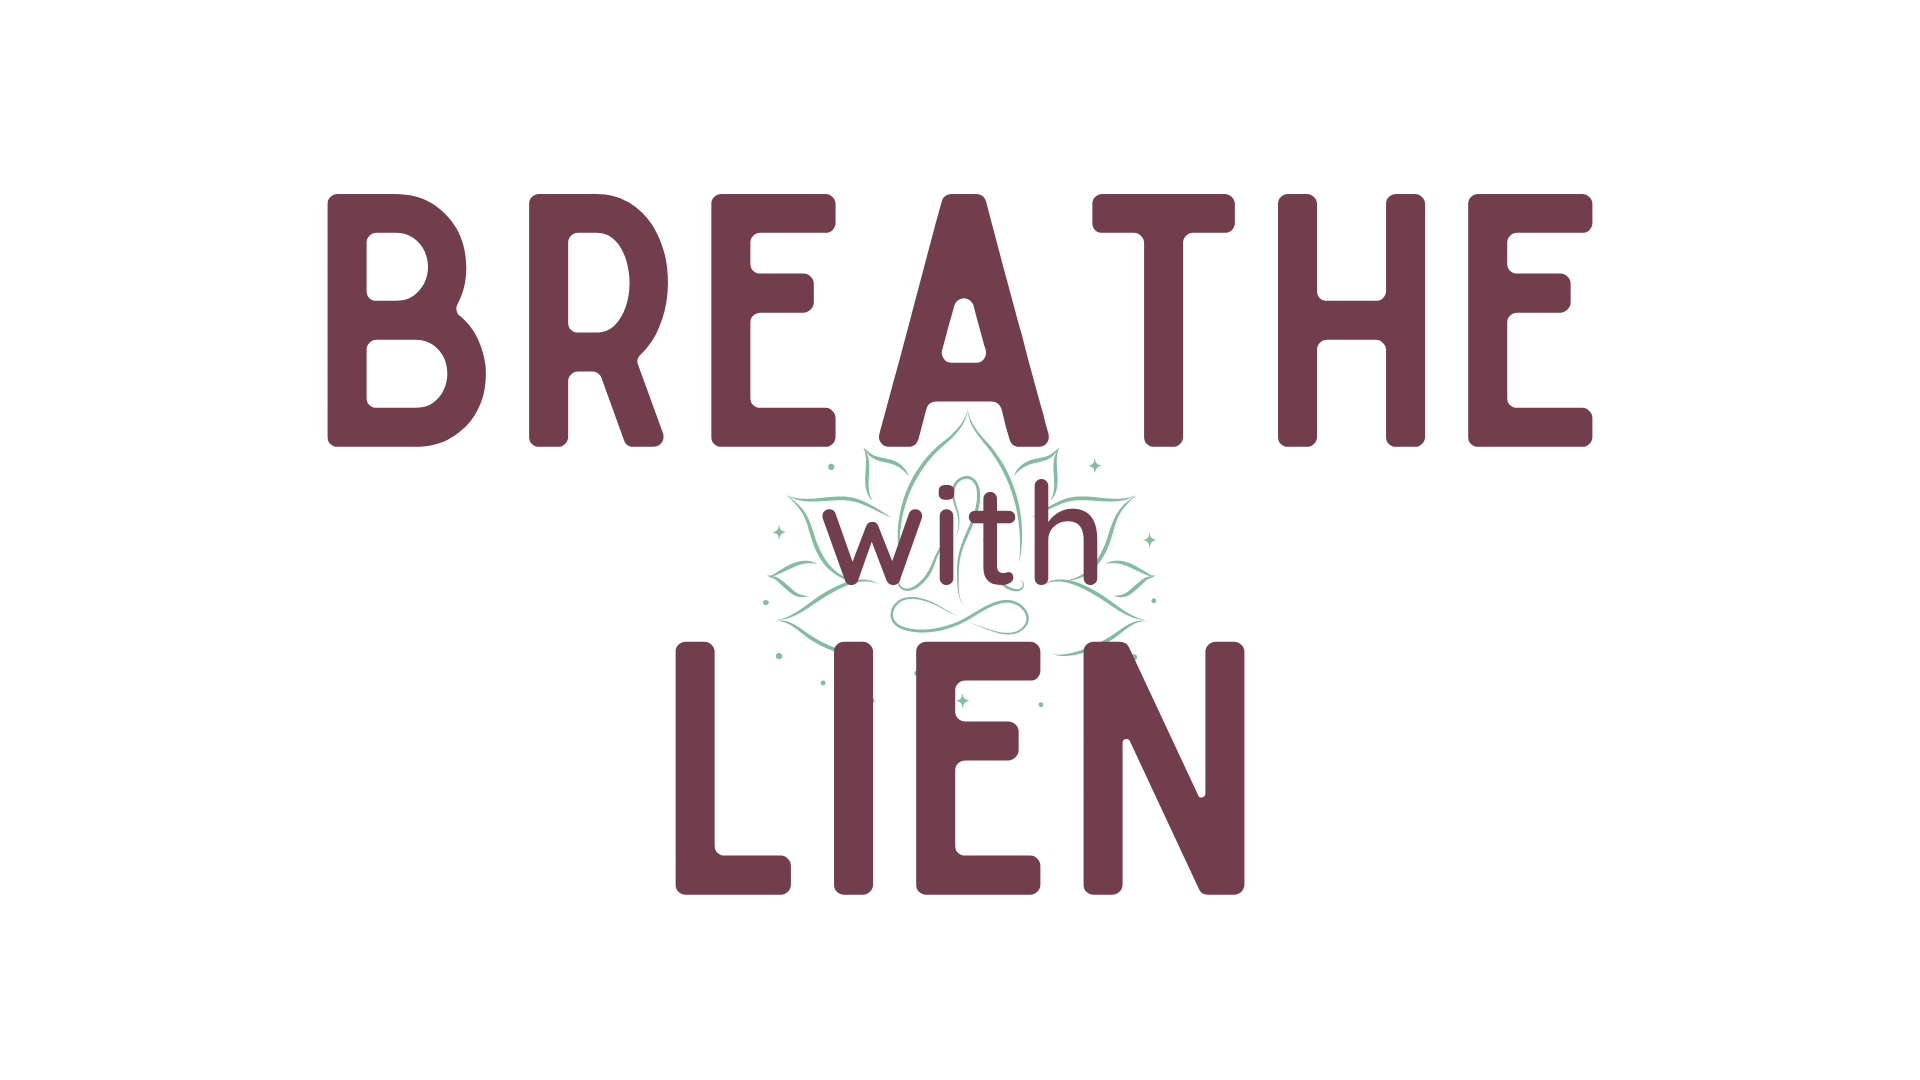 Breathe with Lien